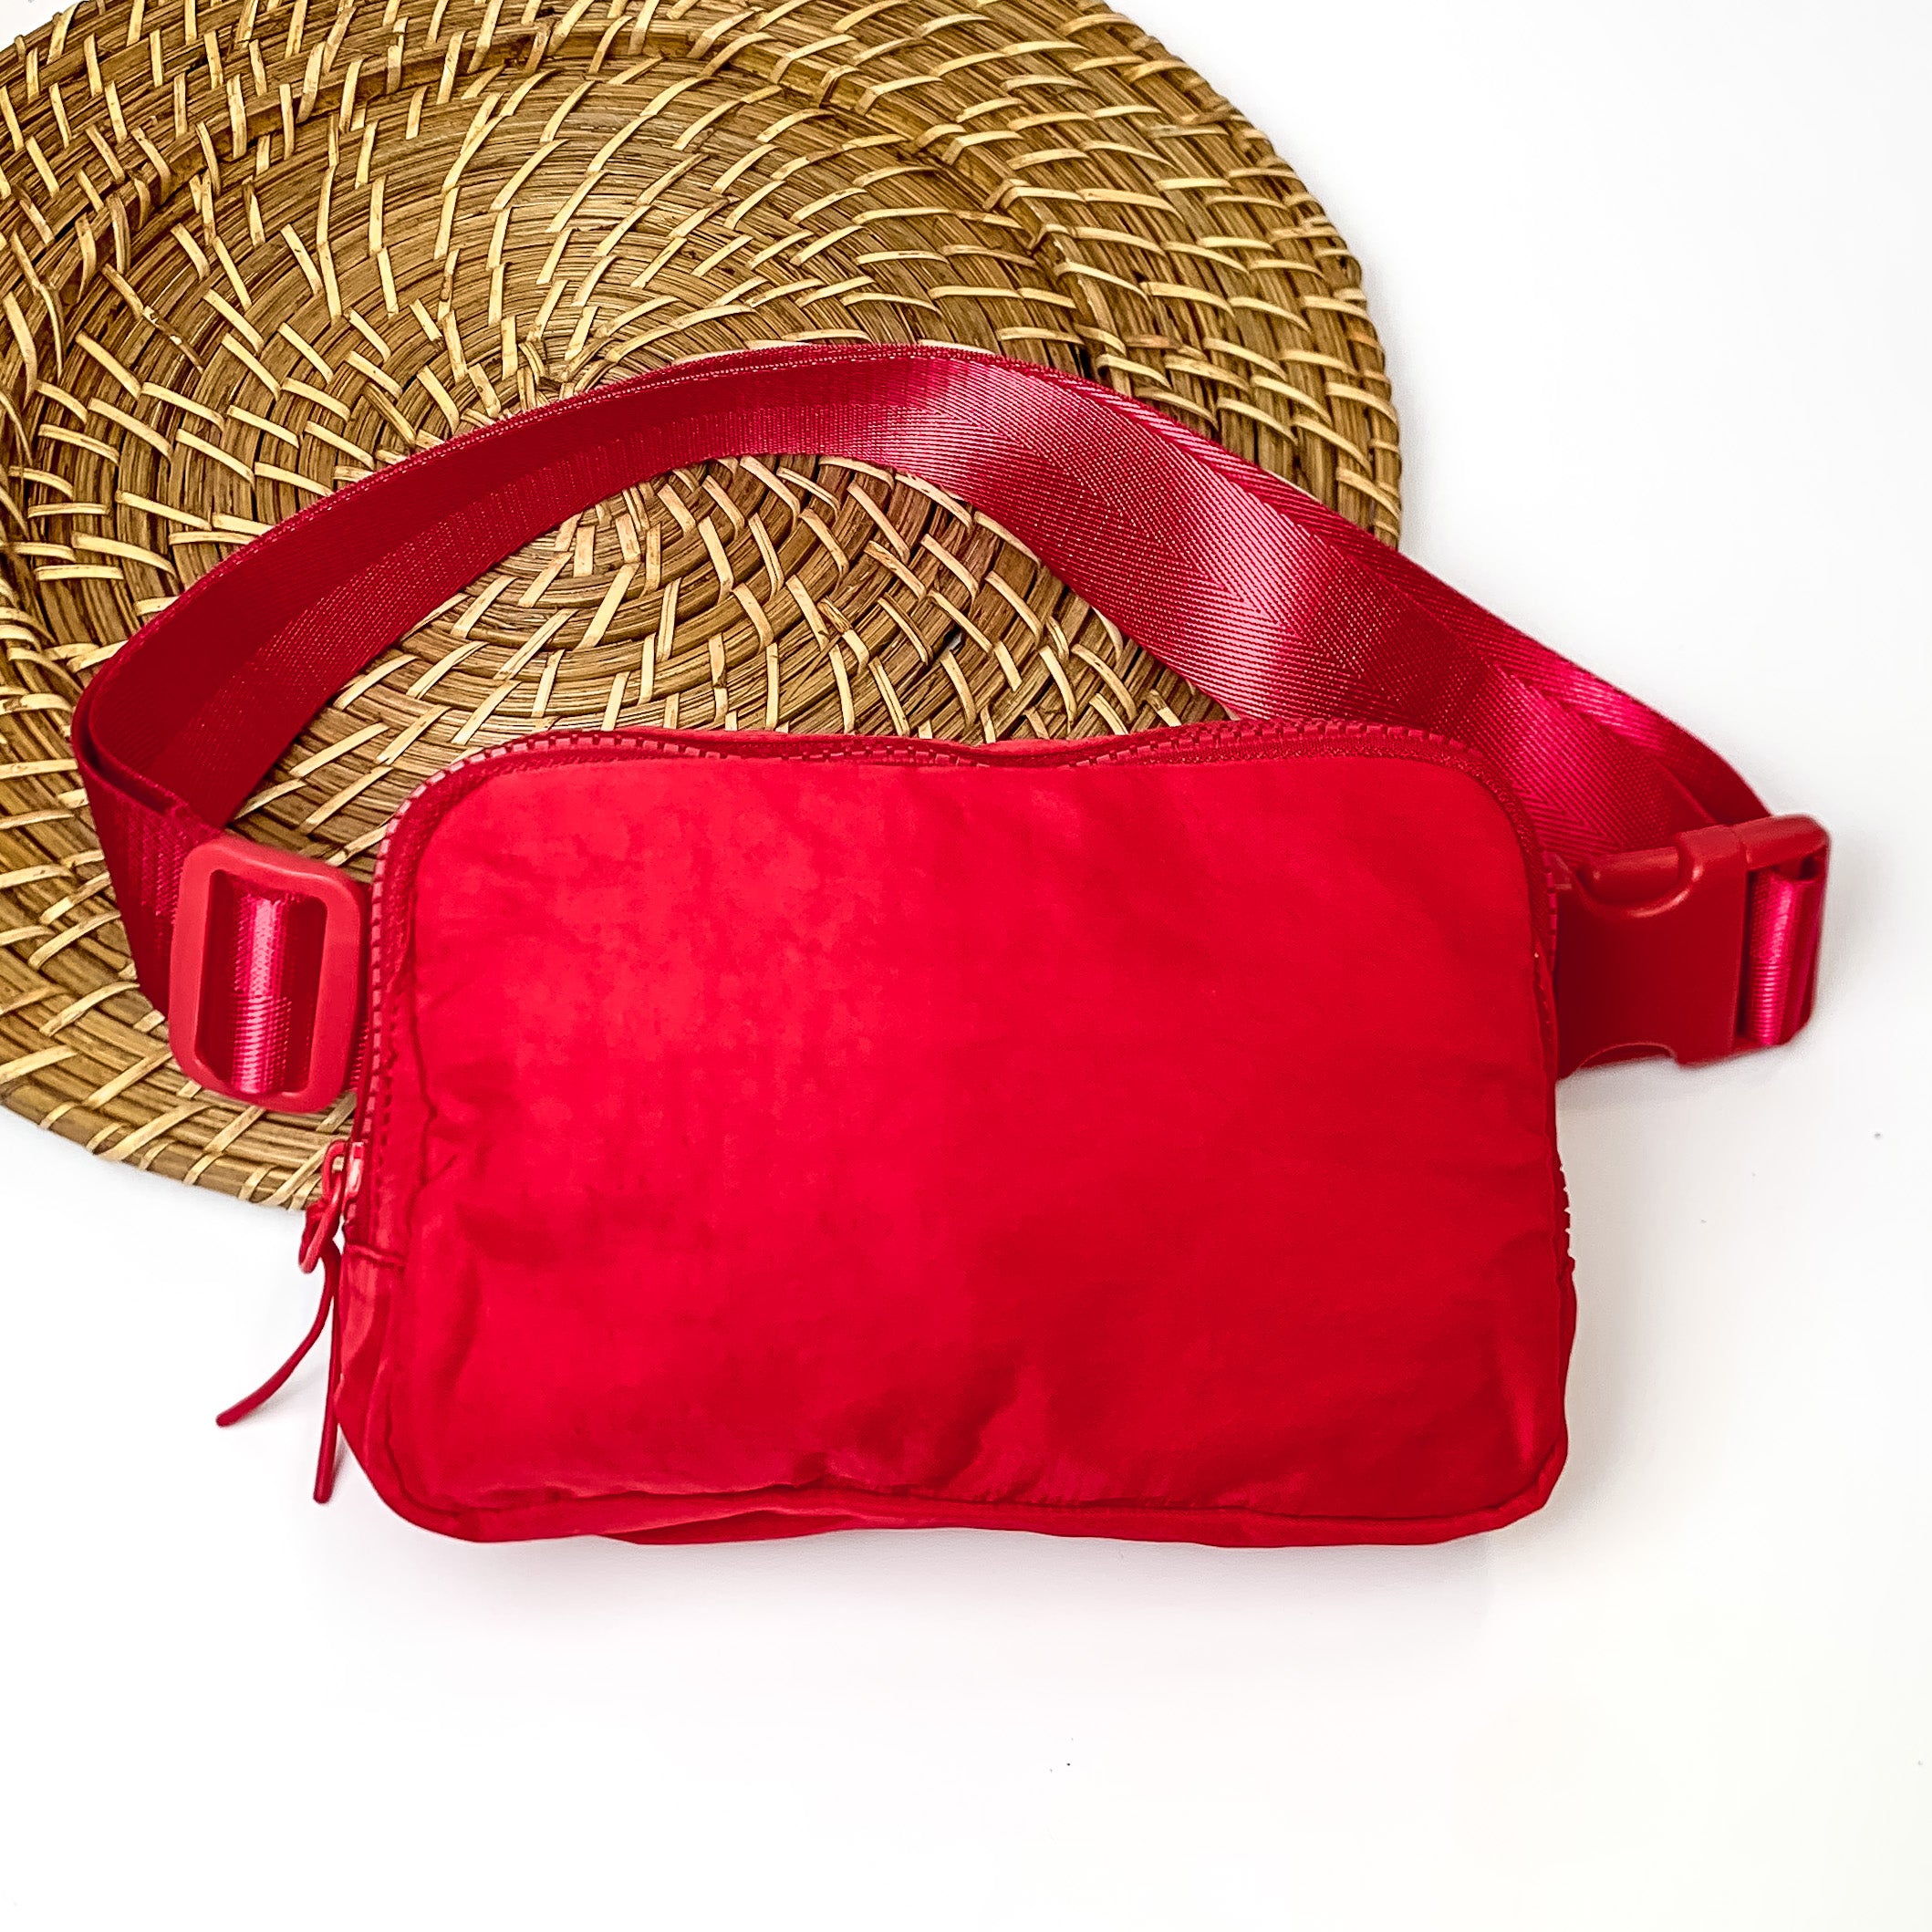 Pictured is a rectangle fanny pack with a top zipper with tassel in red. This bag also includes a red strap and red accents. This bag is pictured on a white and brown patterned background.